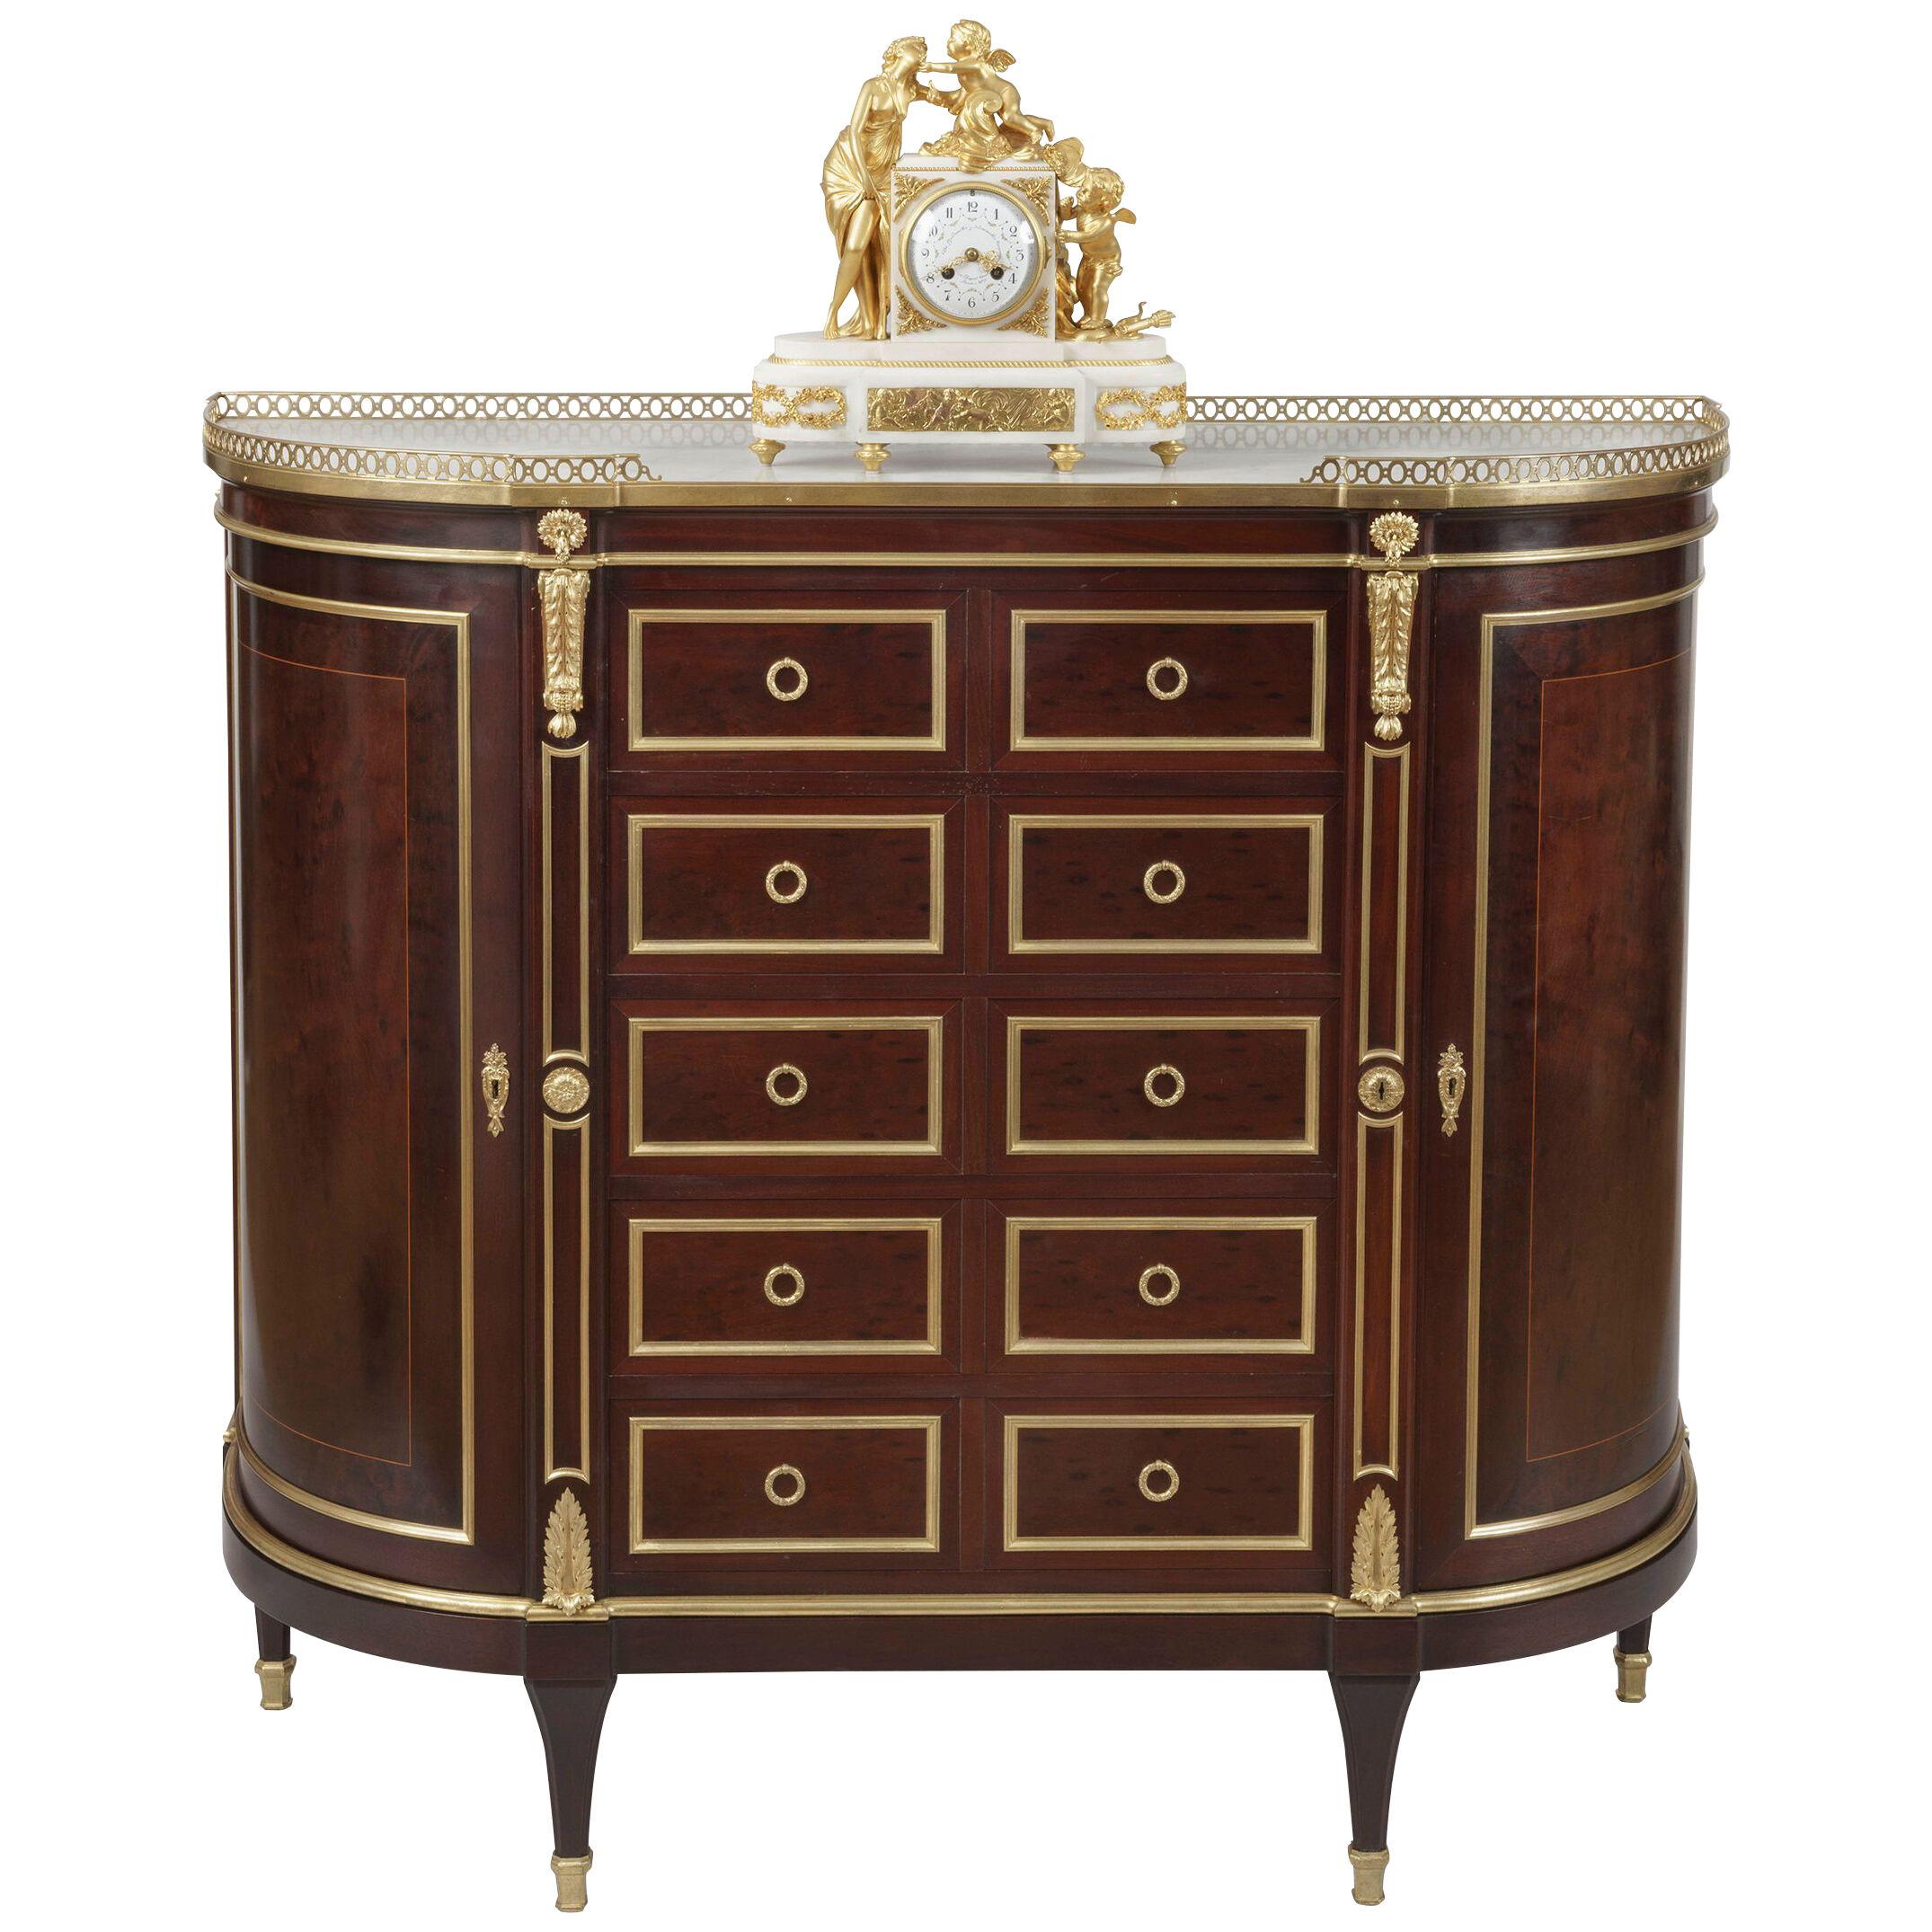 19th Century Side Cabinet in the Louis XVI Manner by Durand of Paris